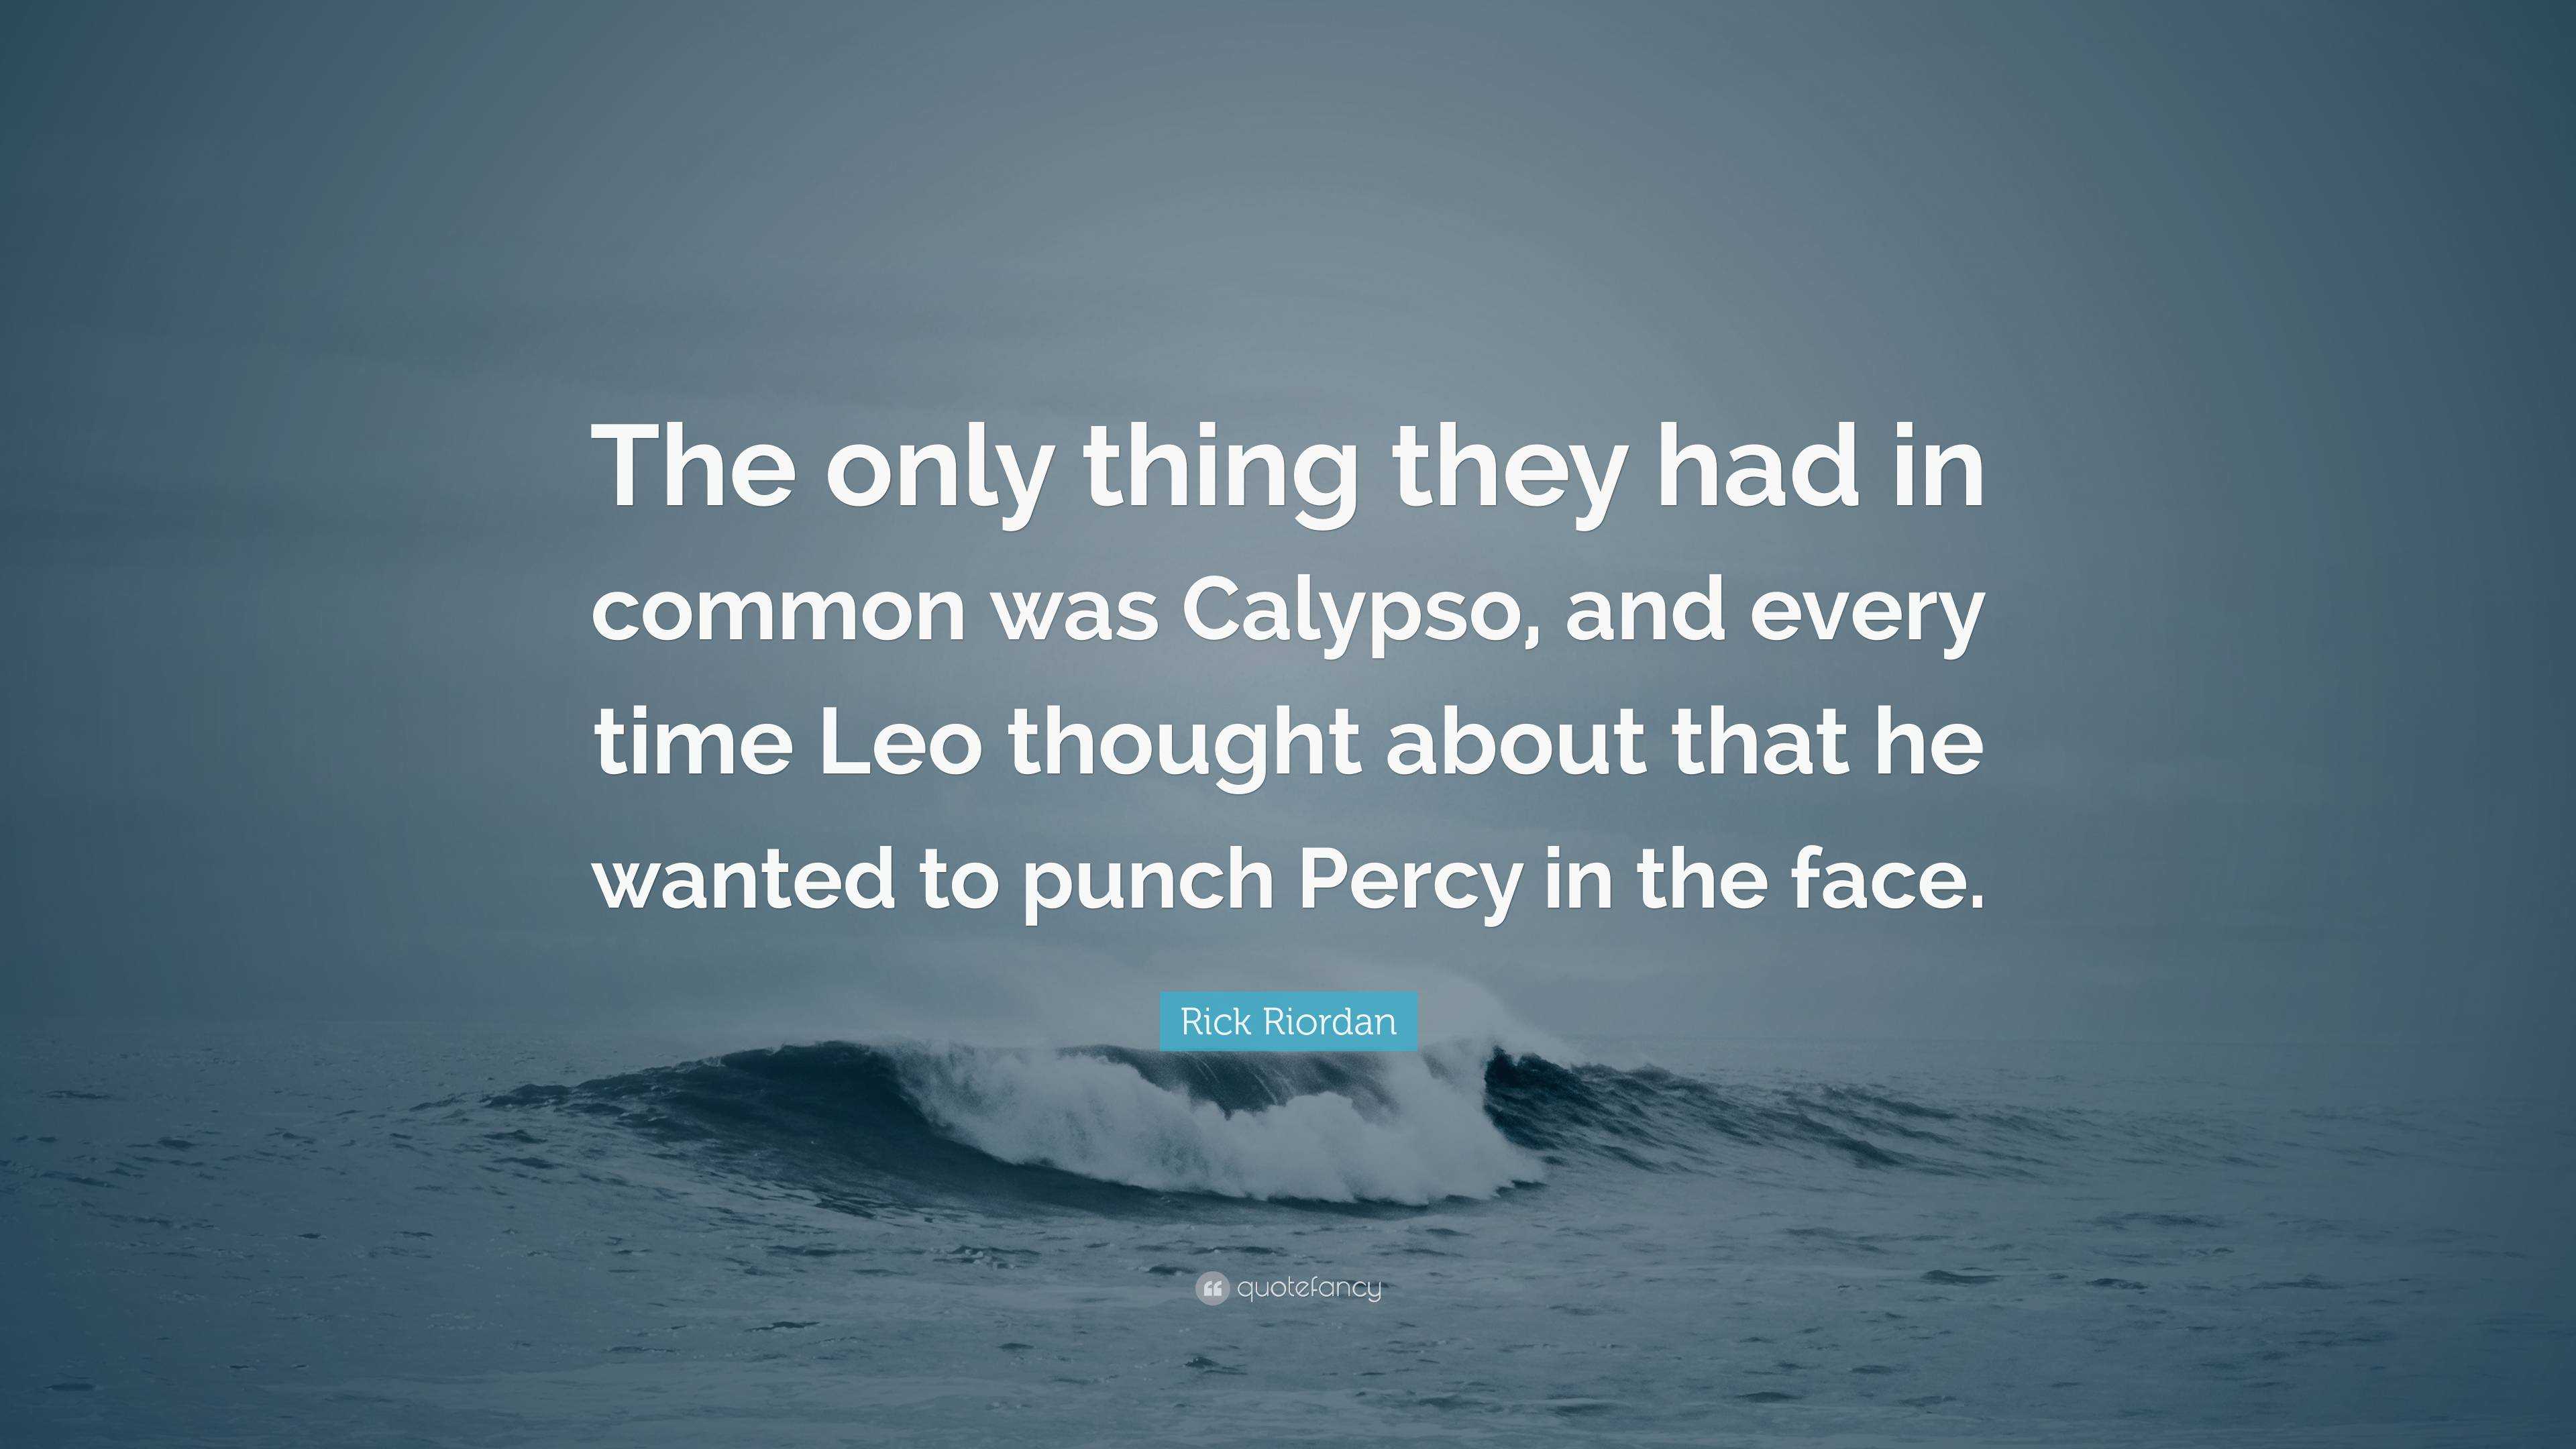 Rick Riordan Quote: “The only thing they had in common was Calypso, and  every time Leo thought about that he wanted to punch Percy in the fac”